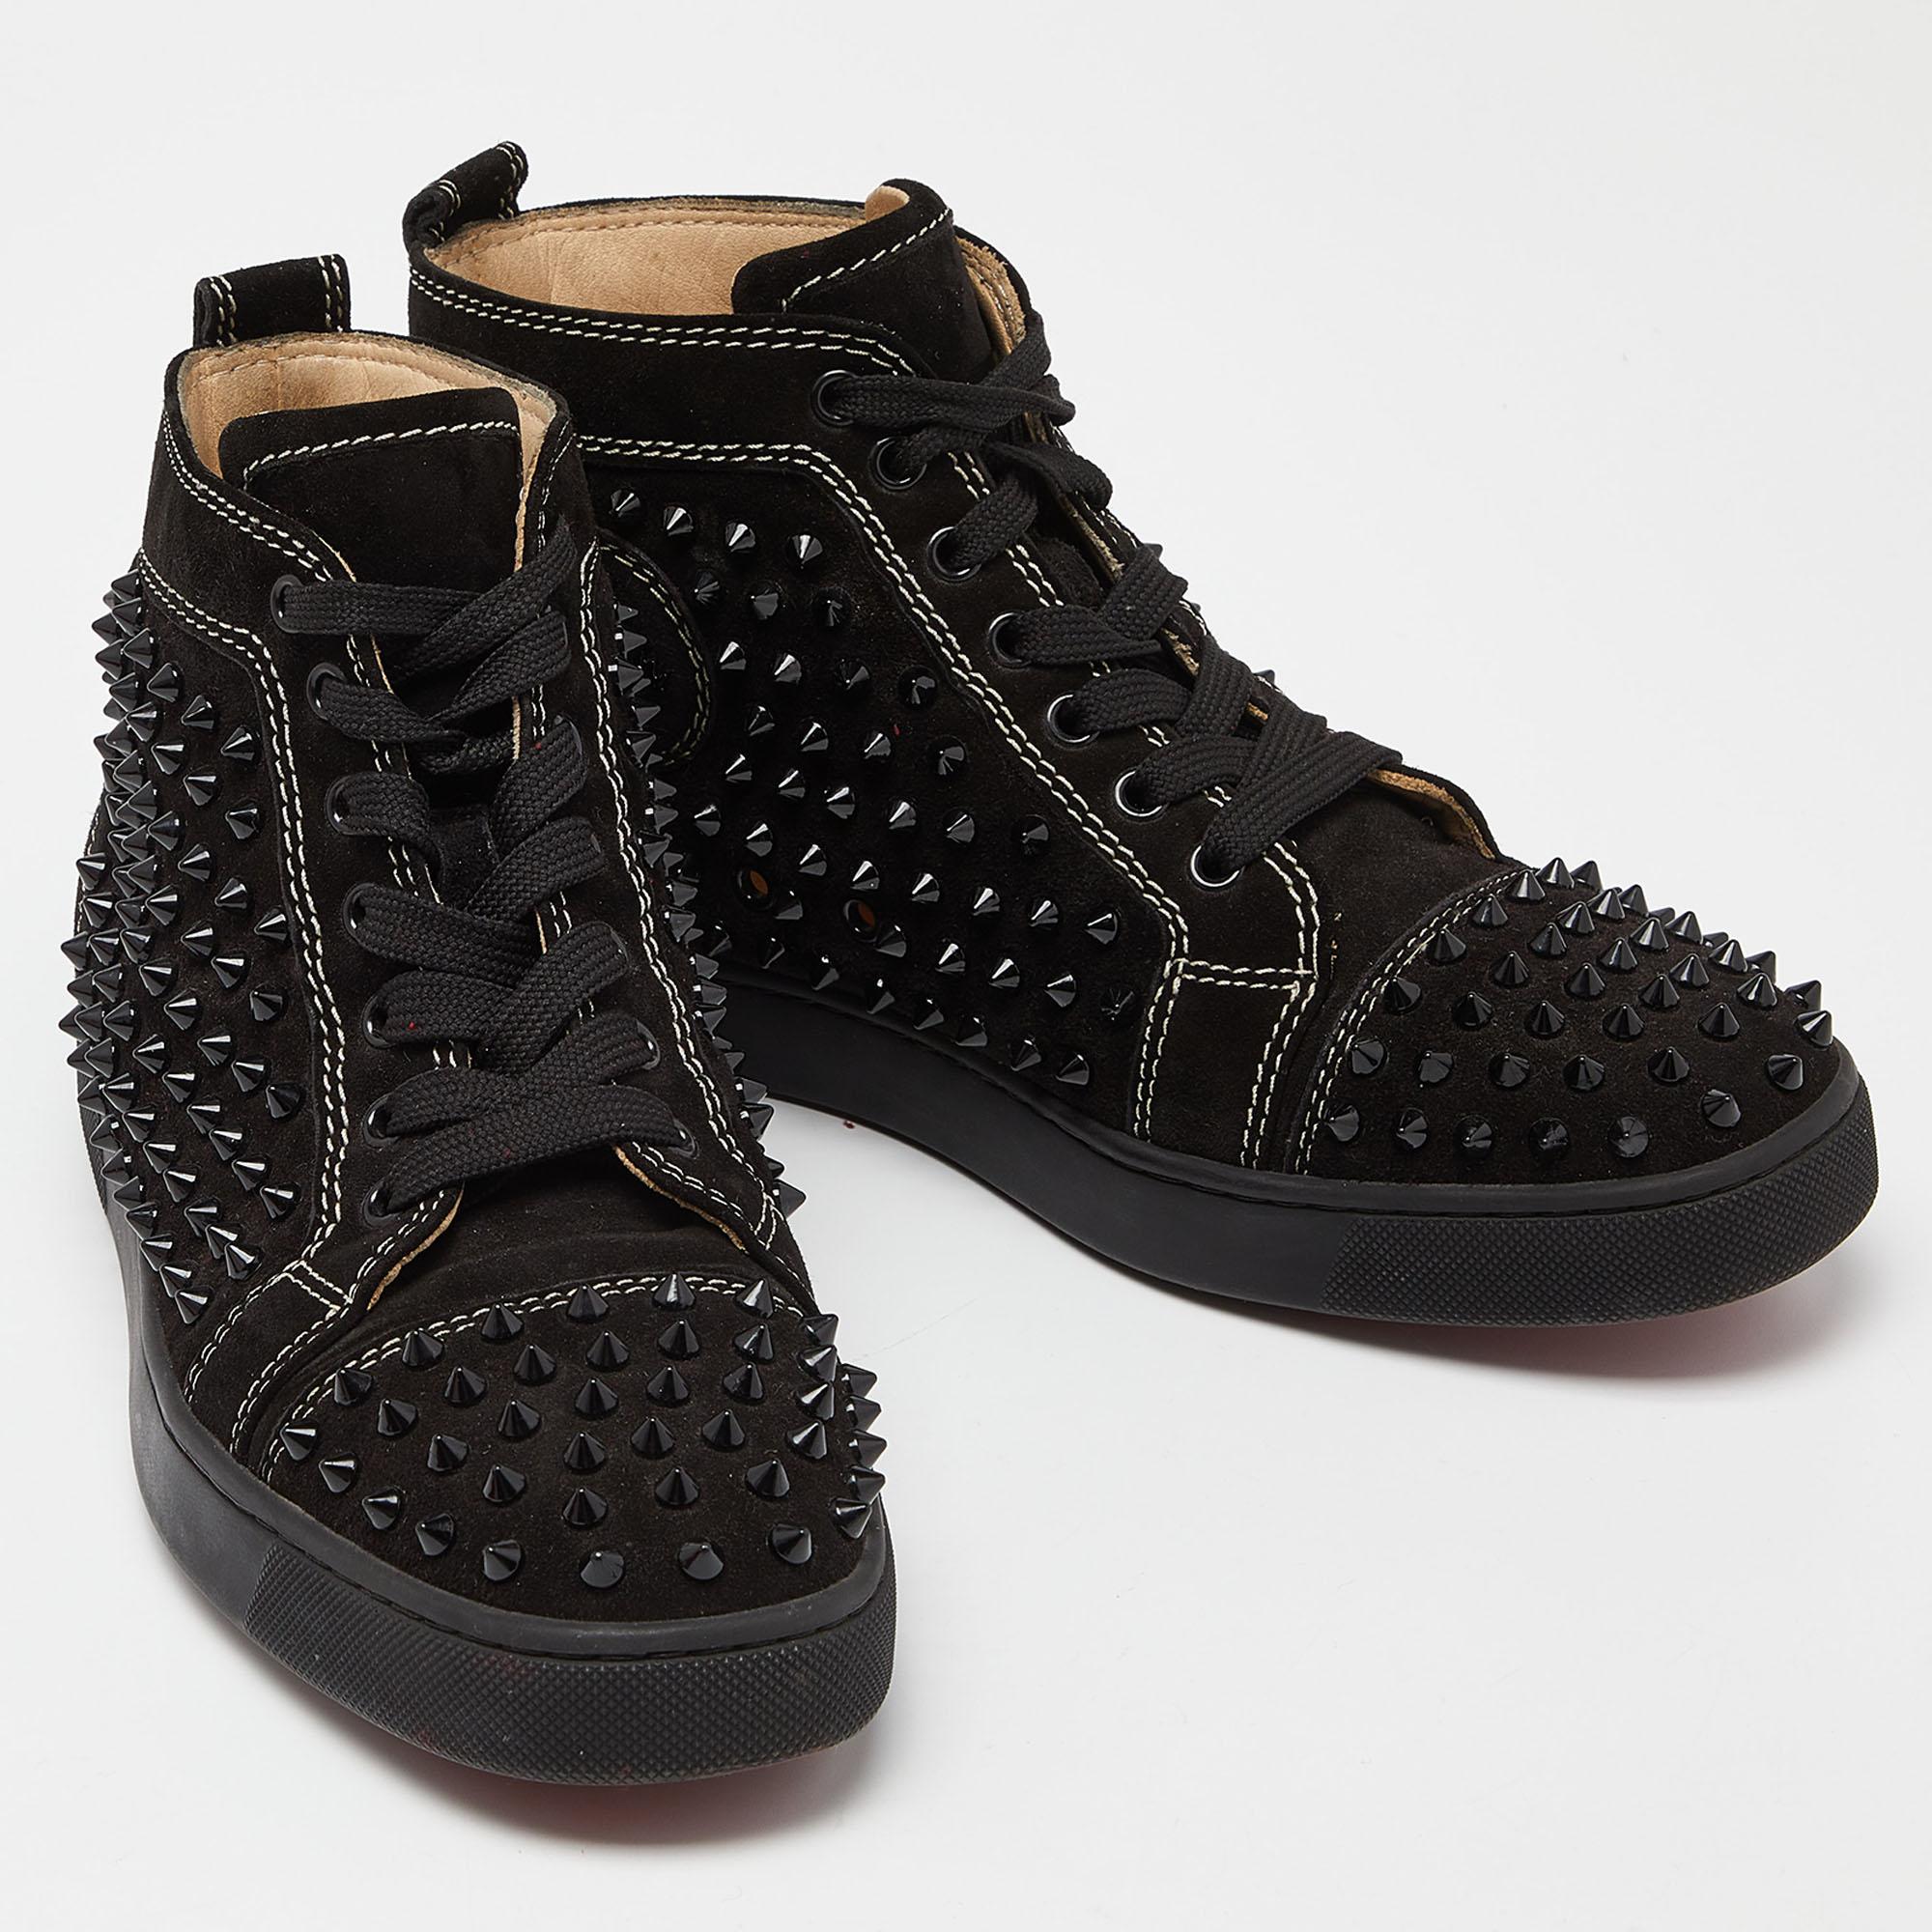 Christian Louboutin Black Suede Spike High Top Sneakers Size 40 In Good Condition For Sale In Dubai, Al Qouz 2